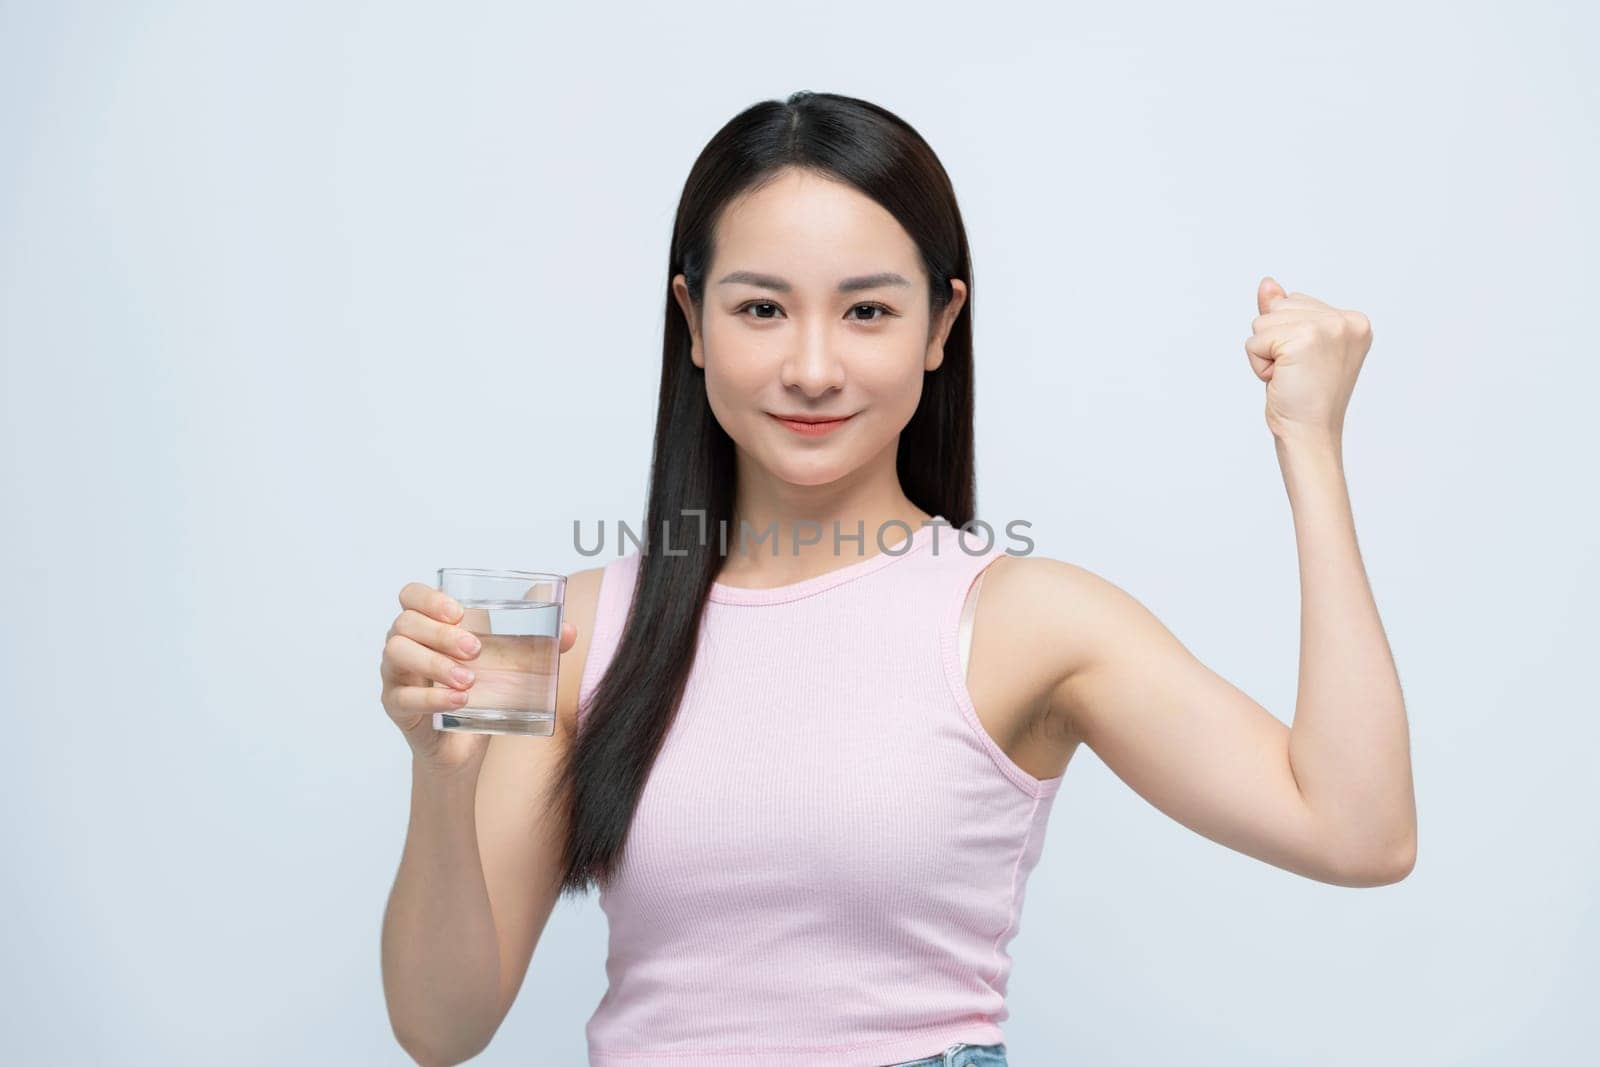 Asian woman drinking glass of water screaming proud, celebrating victory with raised arm by makidotvn